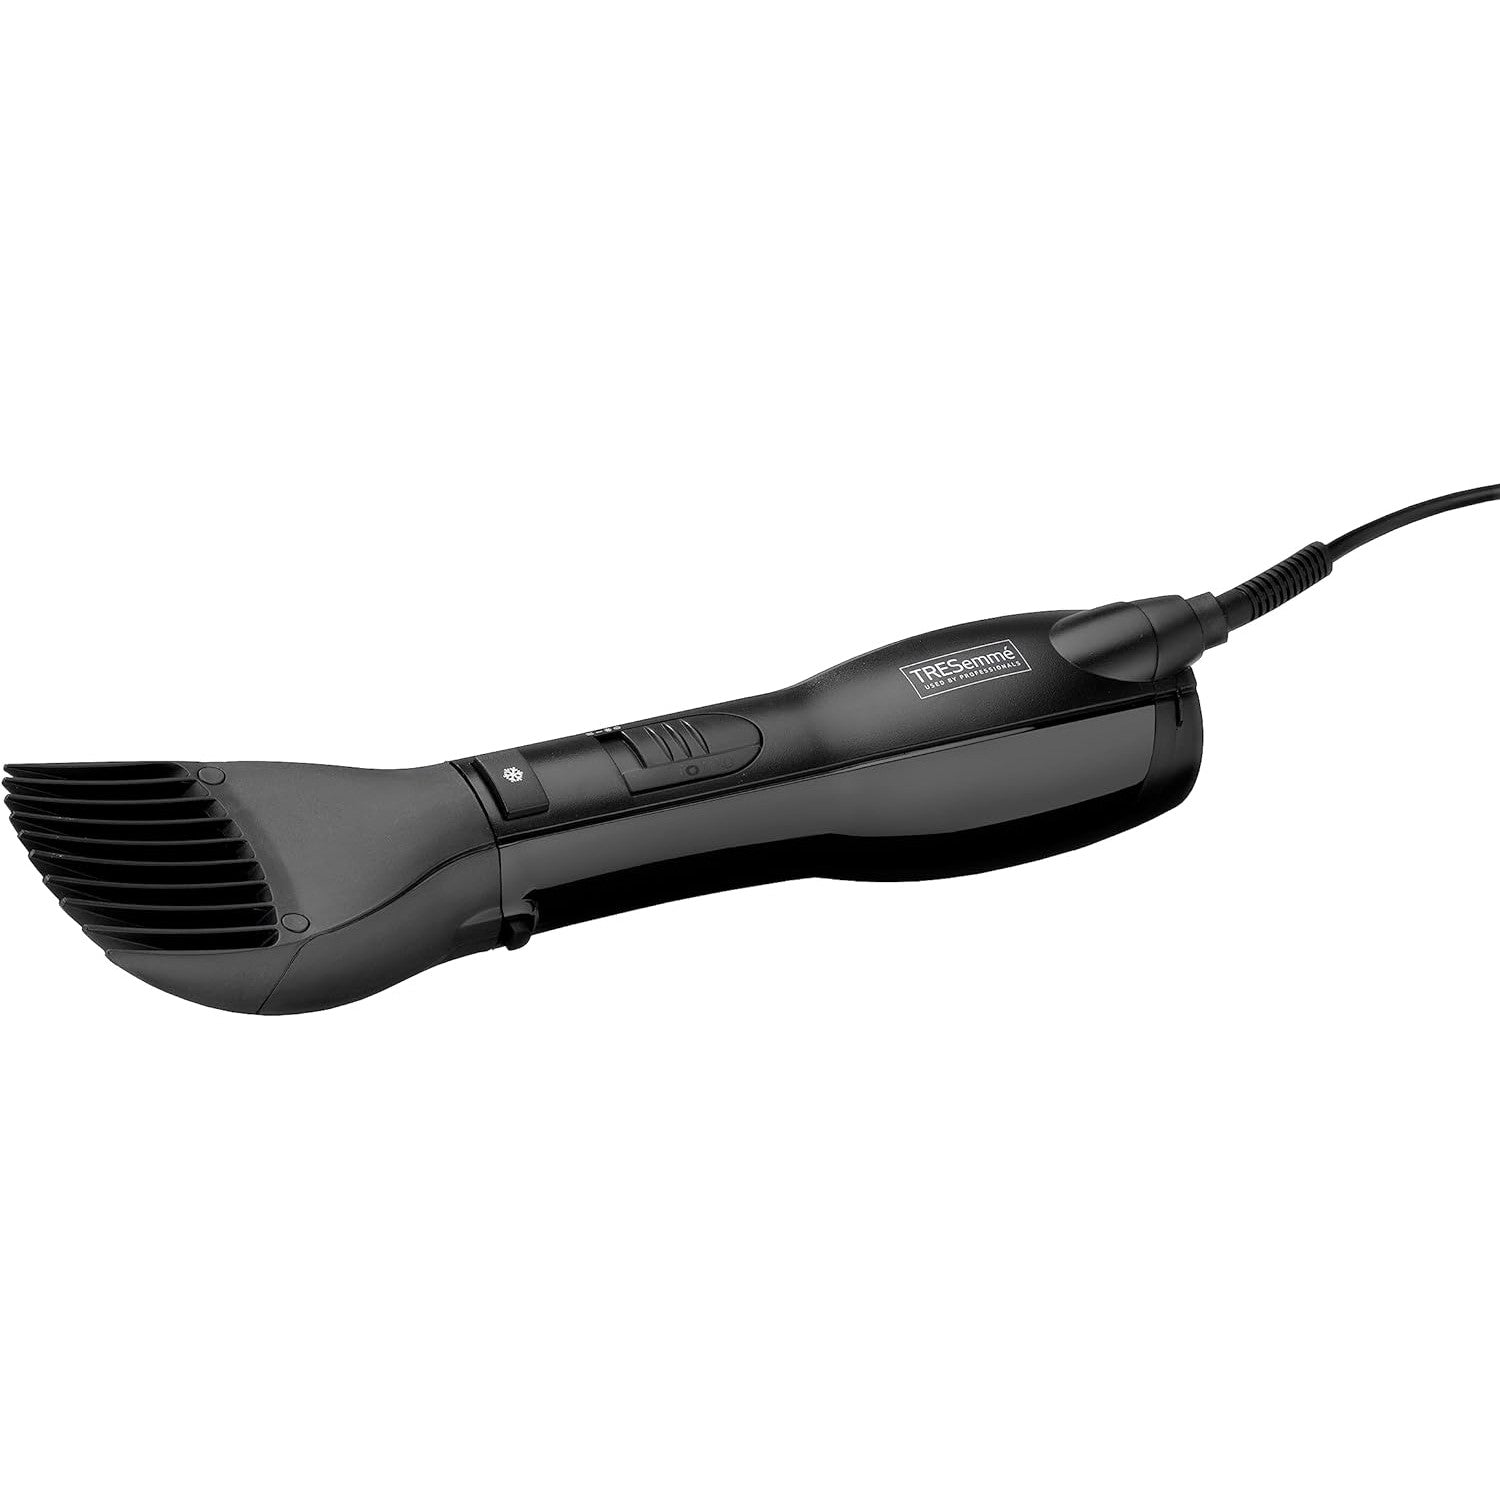 TRESemme Smooth Volume 1000W Hair Dryer Brush, 2 in-1 Hot Air Style